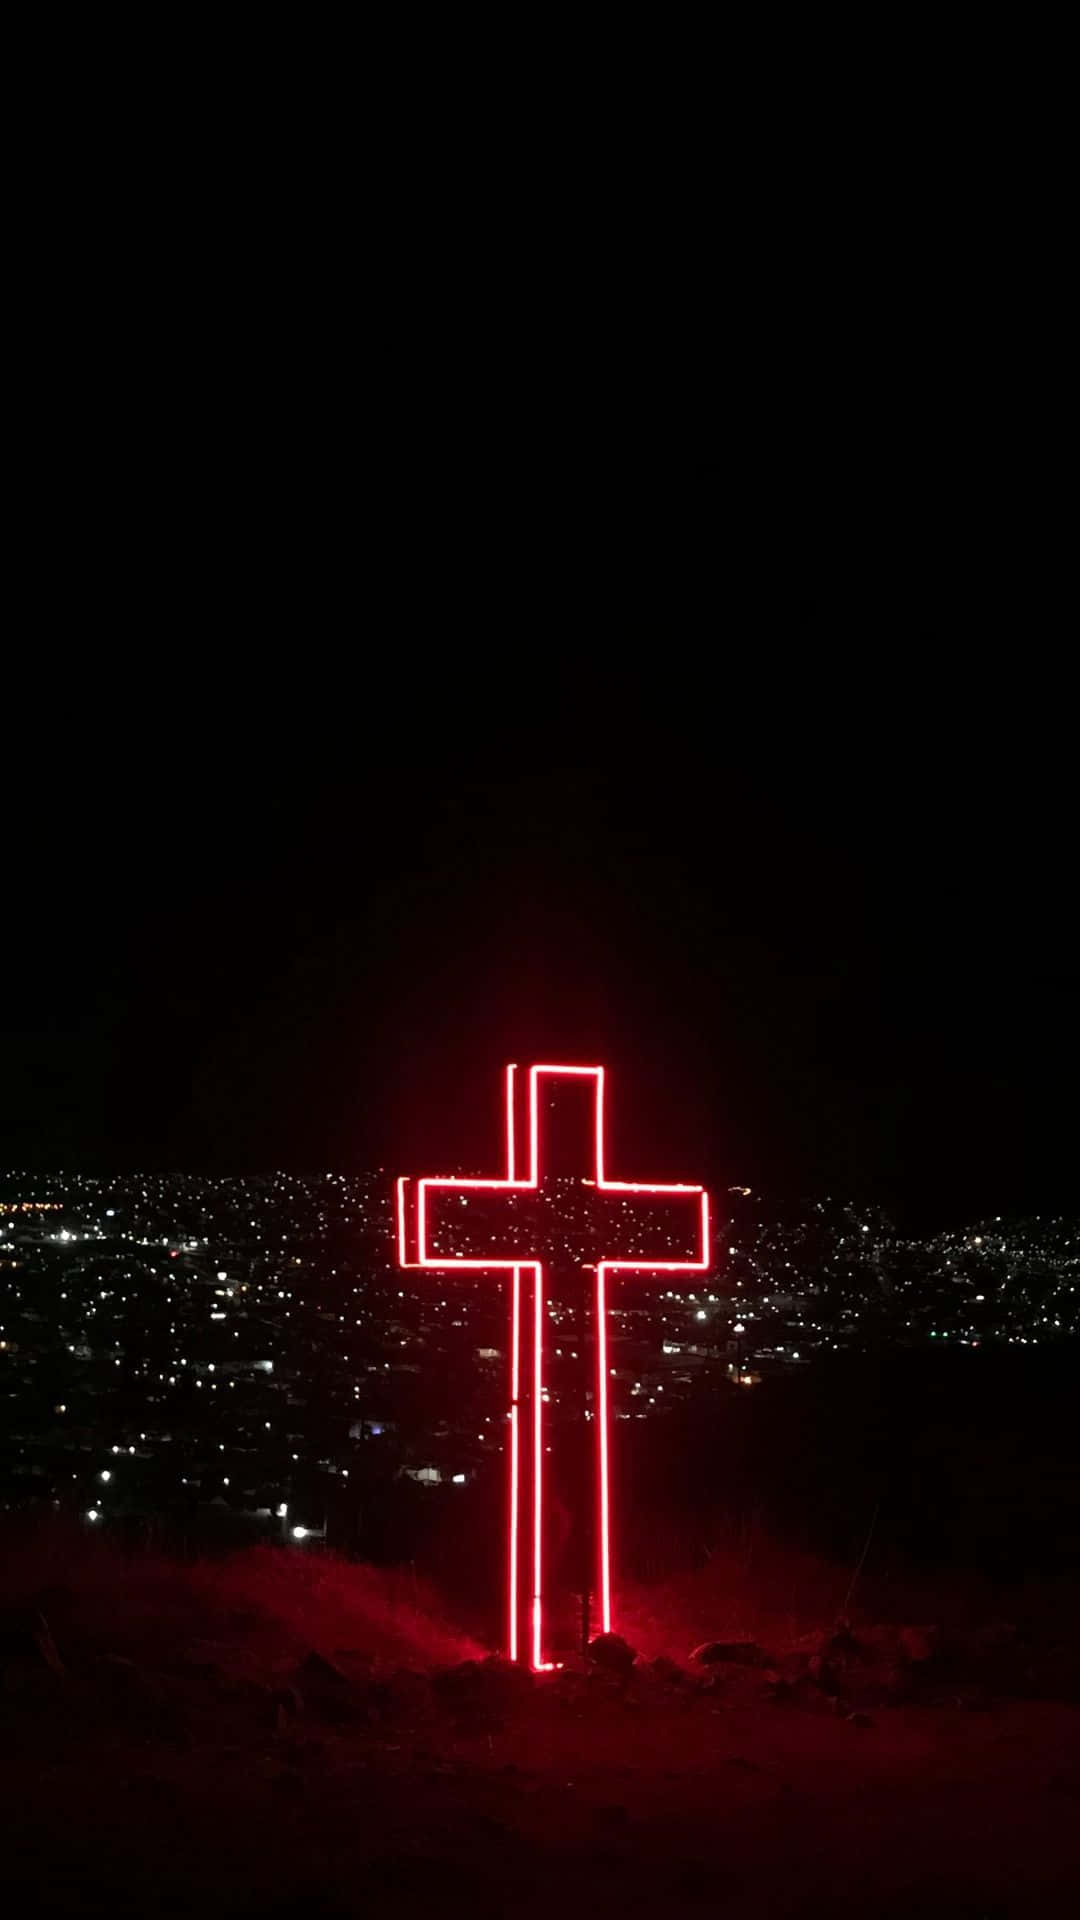 Spread the message of God and Jesus Christ with this Jesus LDS iPhone Wallpaper Wallpaper